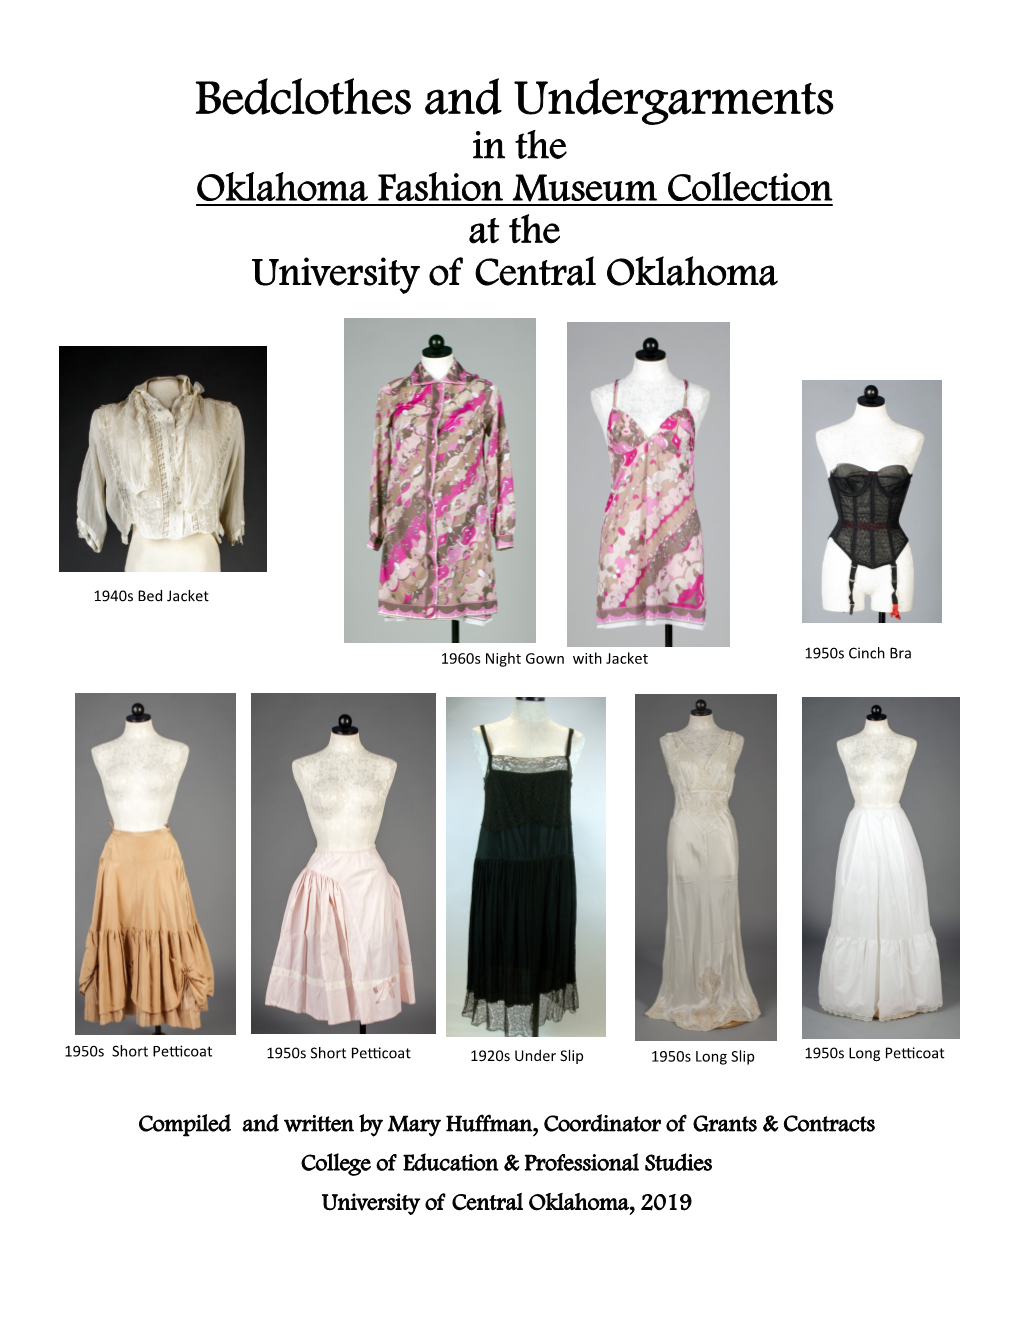 Bedclothes and Undergarments in the Oklahoma Fashion Museum Collection at the University of Central Oklahoma